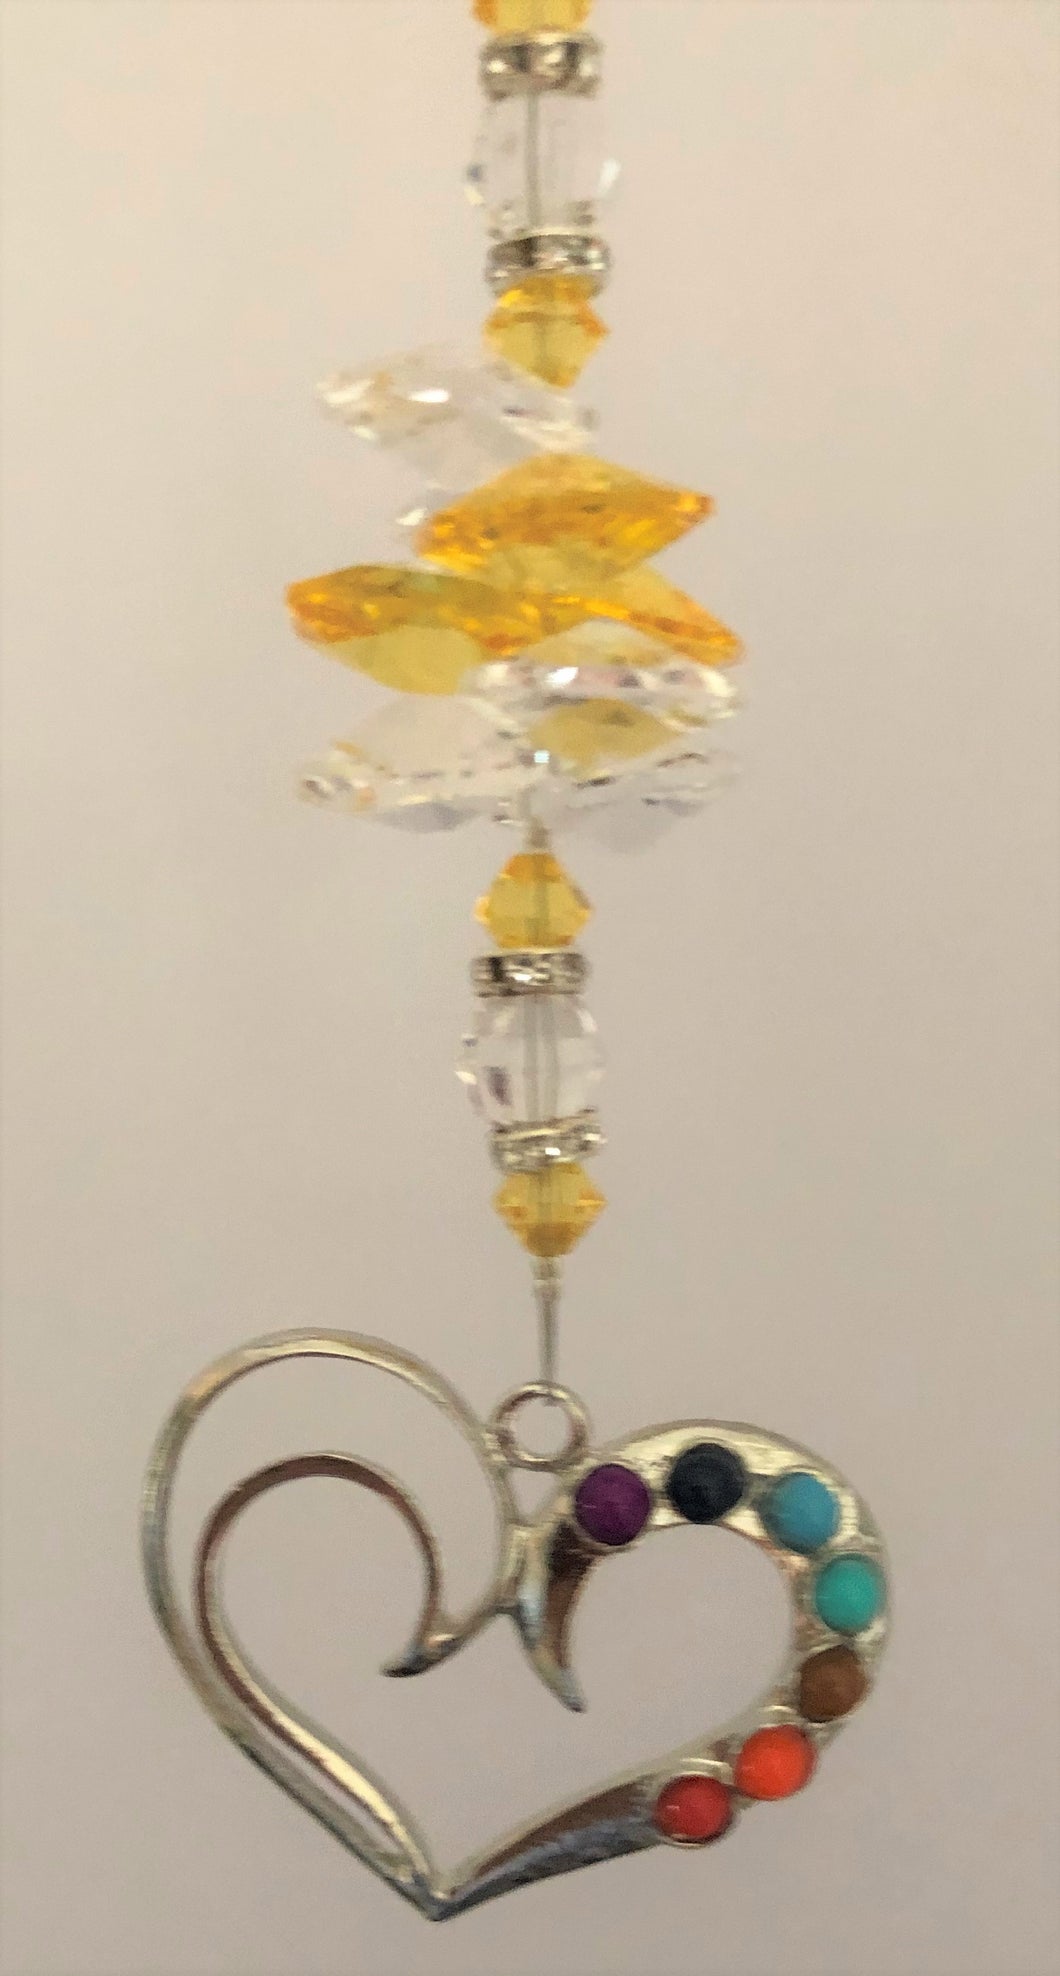 This beautiful Chakra Heart suncatcher which is decorated with crystals and Citrine